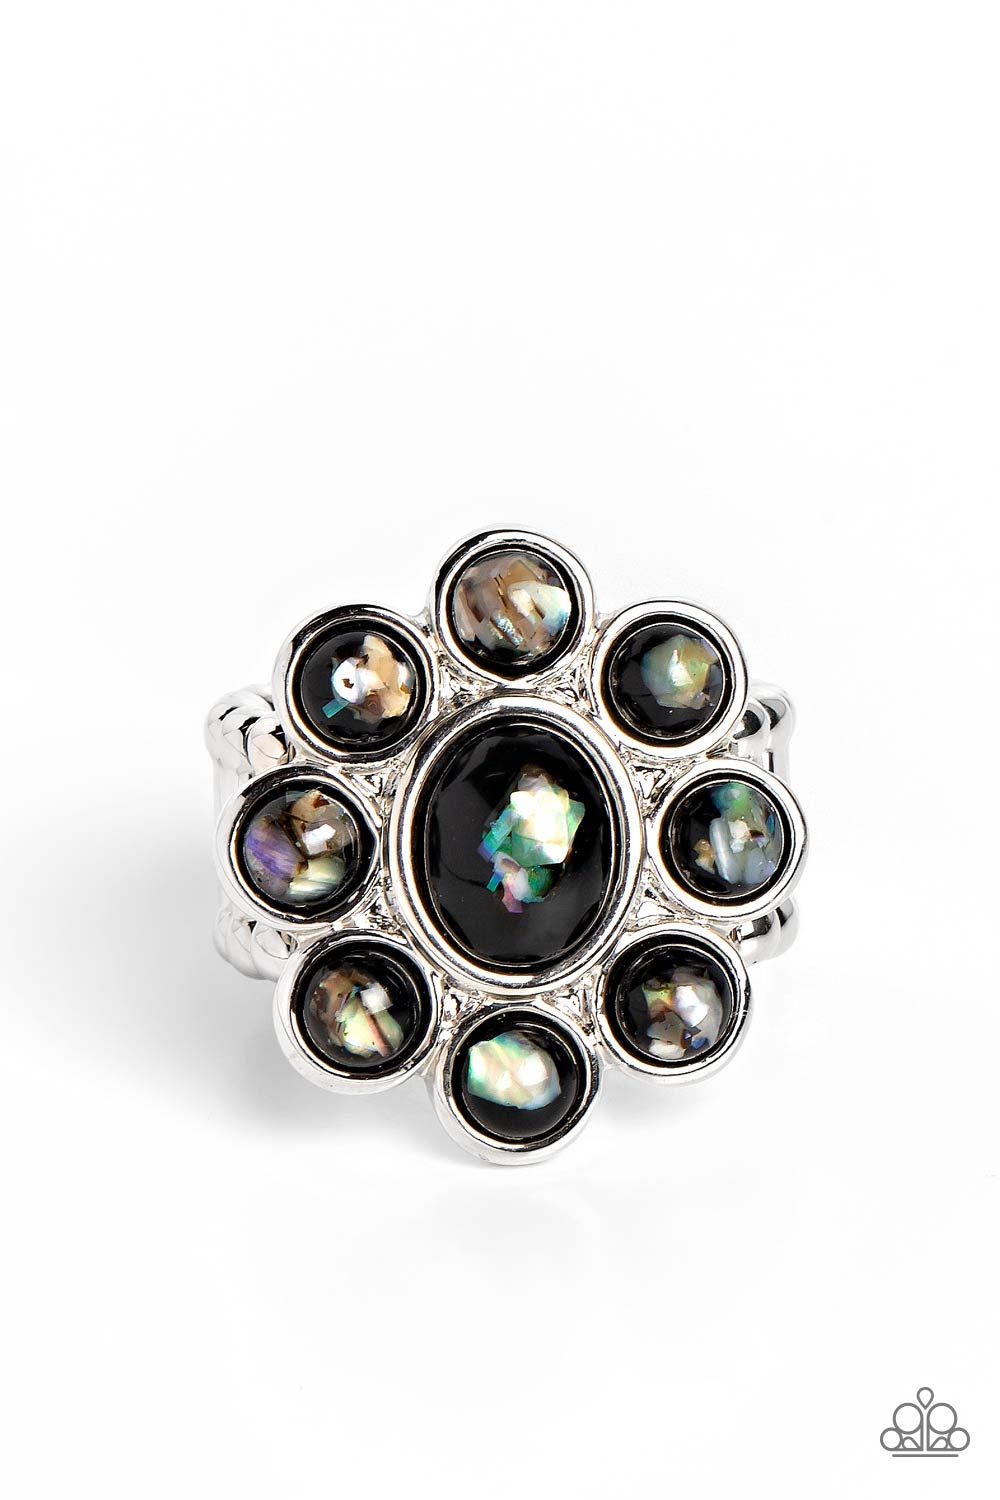 Time to SHELL-ebrate - Black (Iridescent Shell) Ring